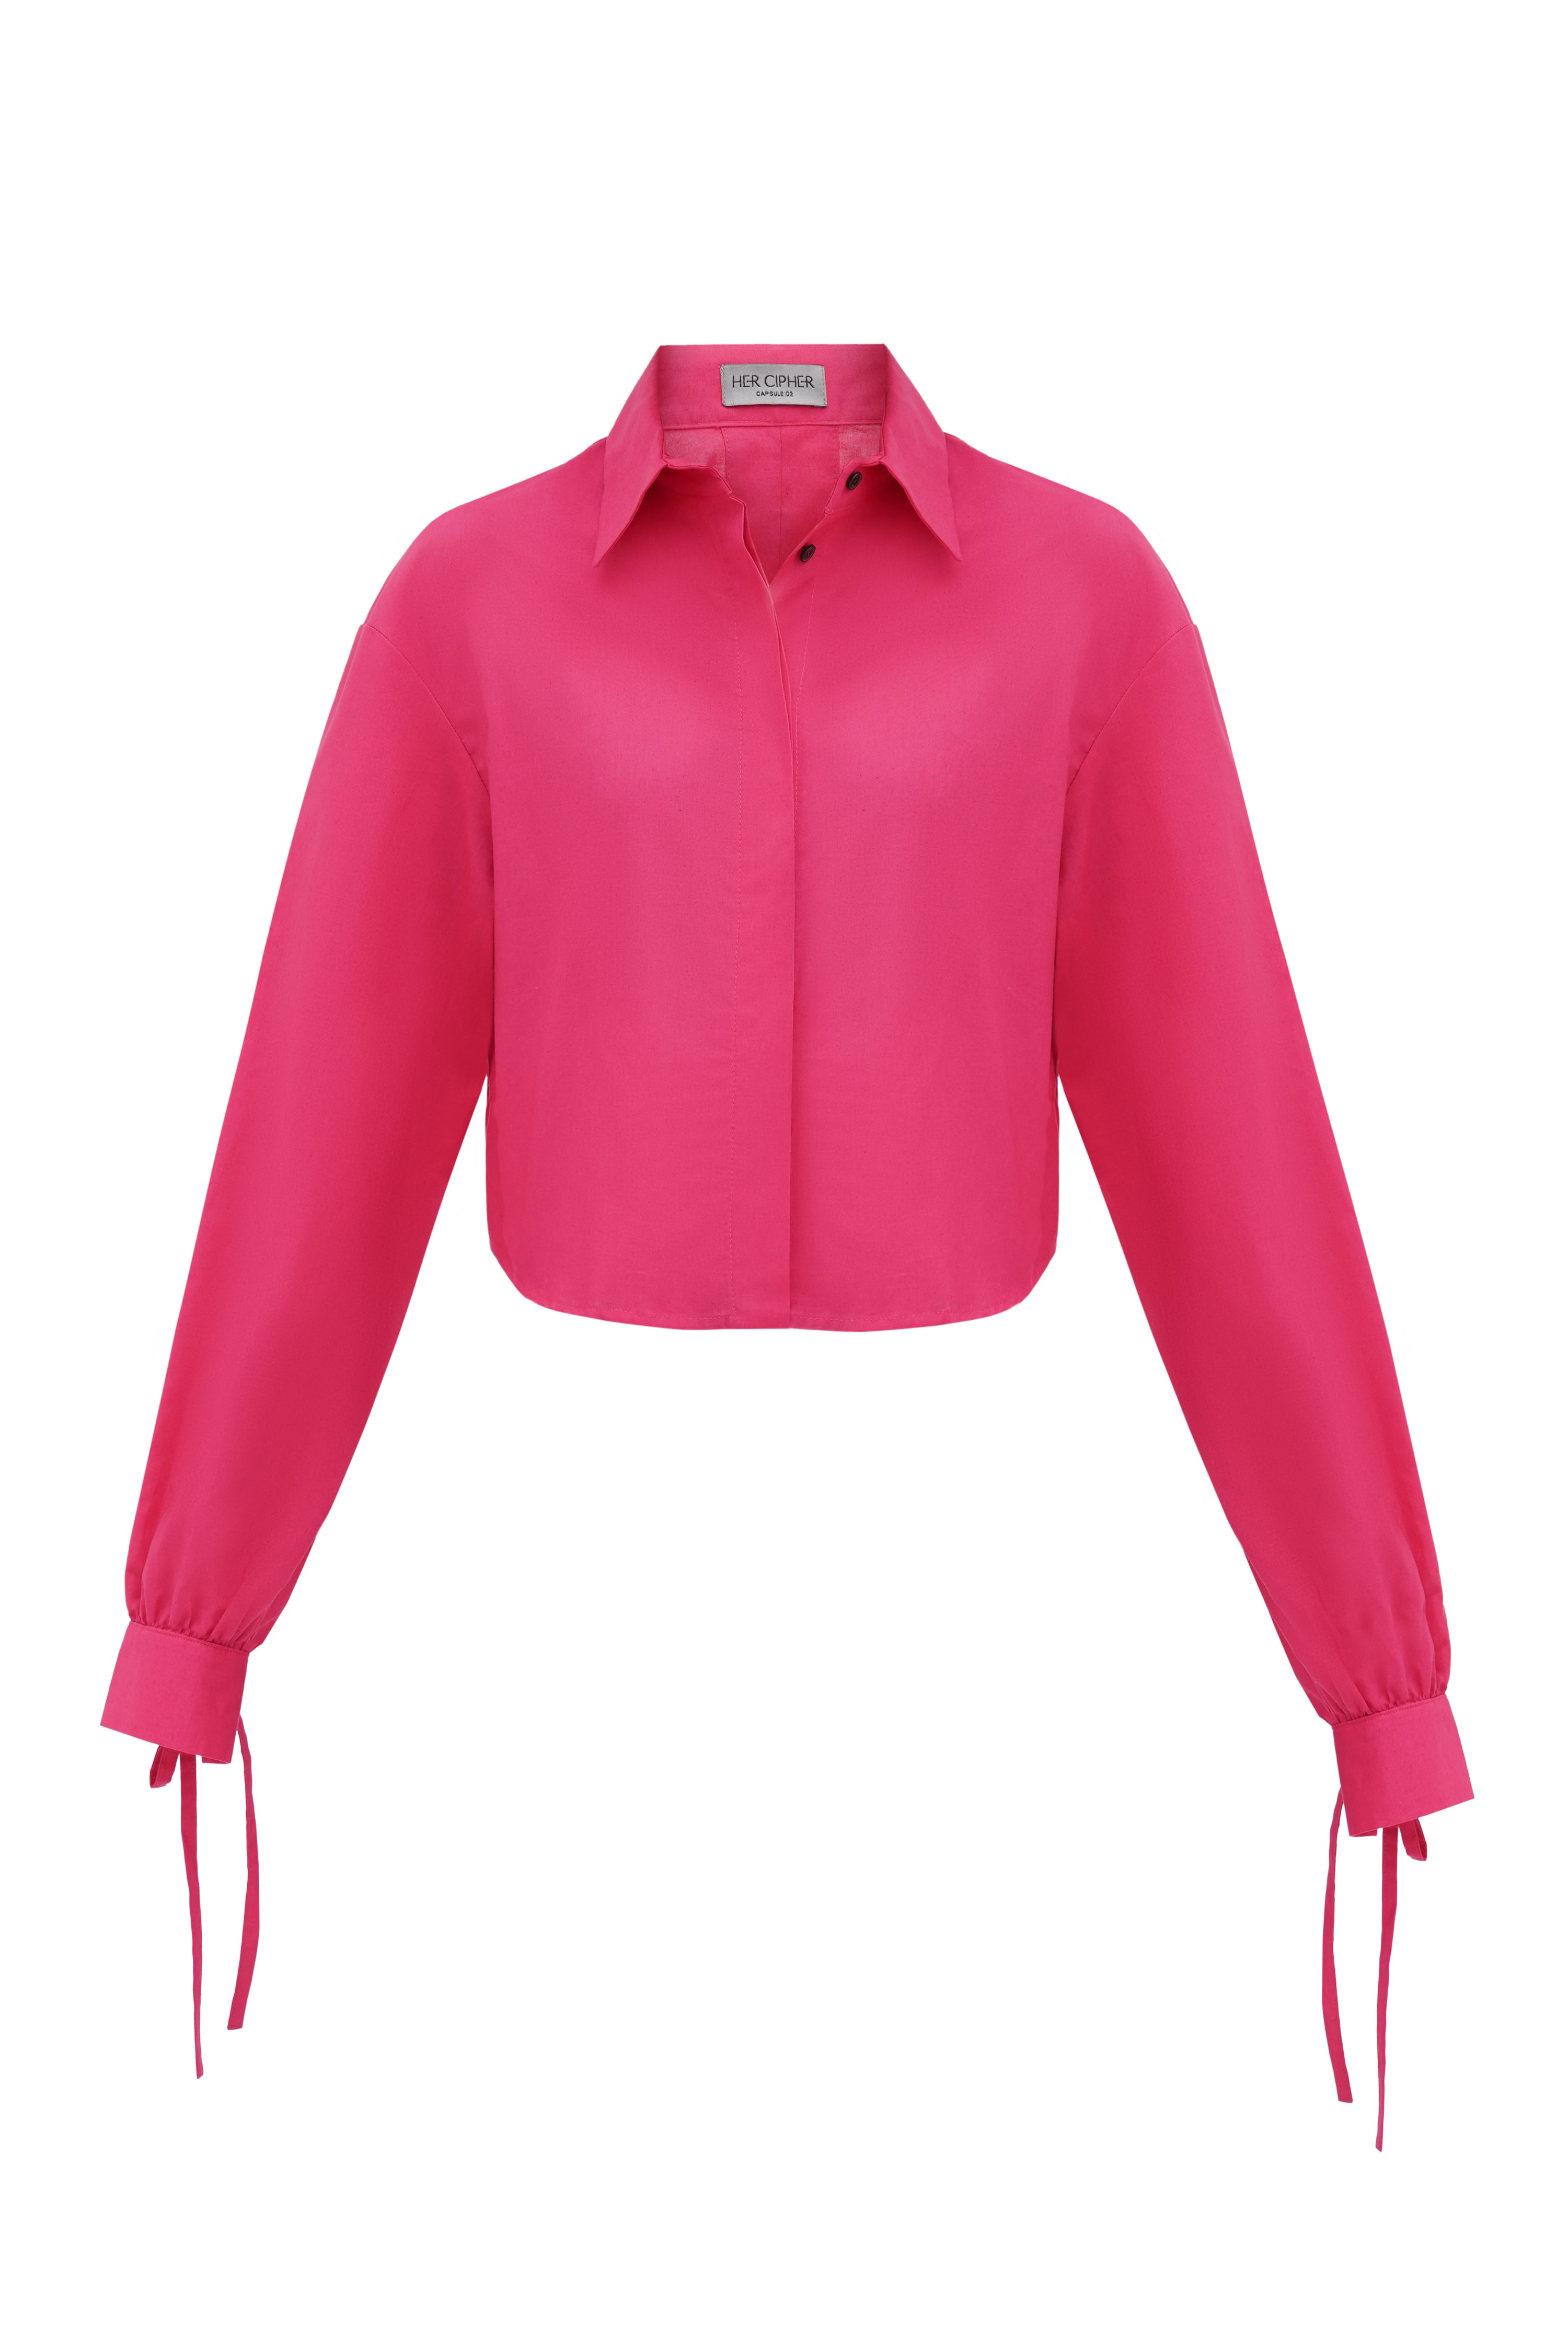 An organic cotton shirt in magenta color with pointed collar and bow-tie details on sleeves